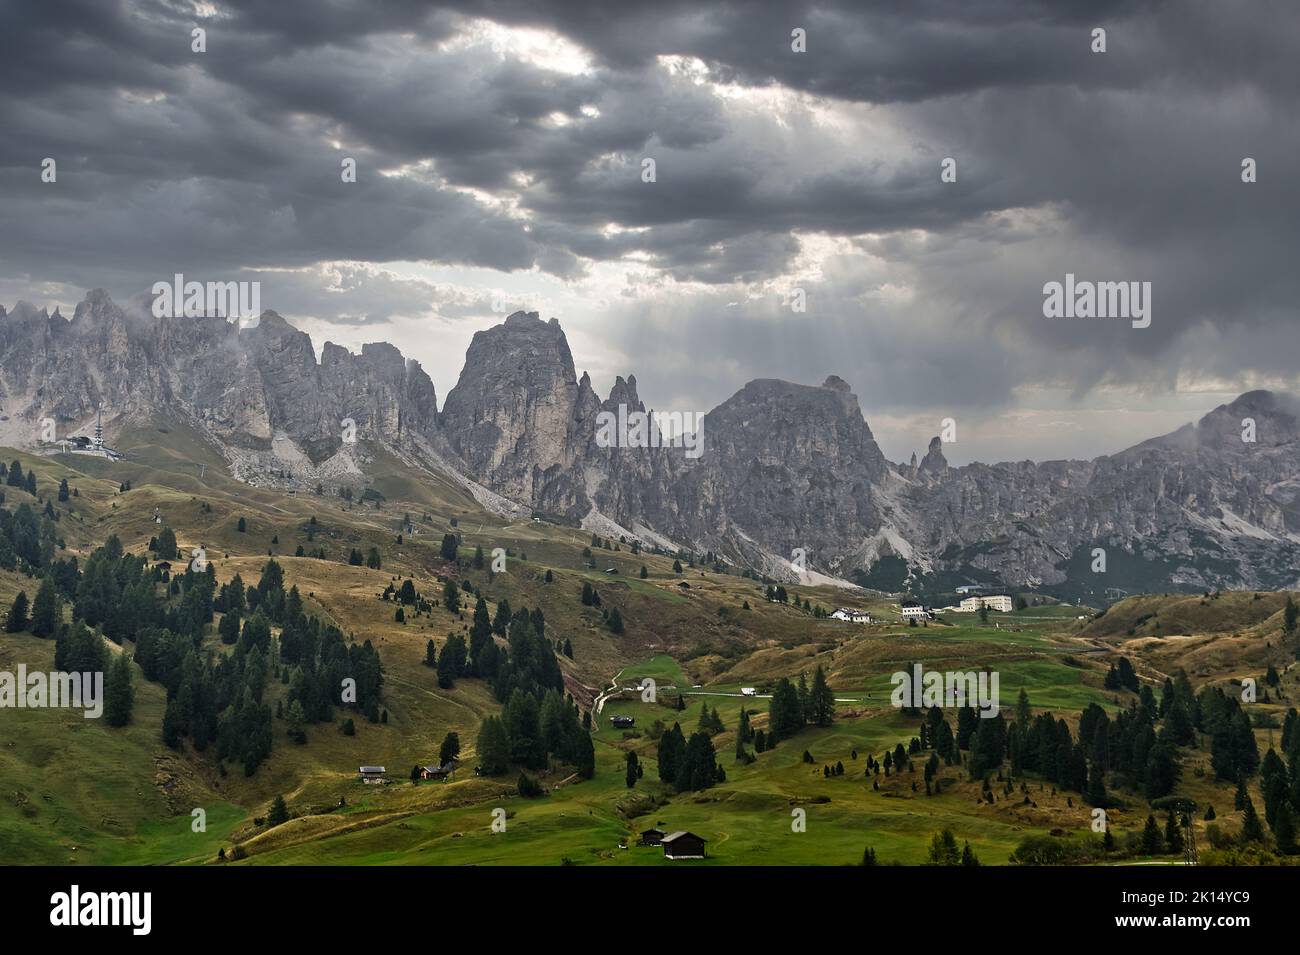 Mountains in Corvara region in Italy with dramatic skies. Stock Photo